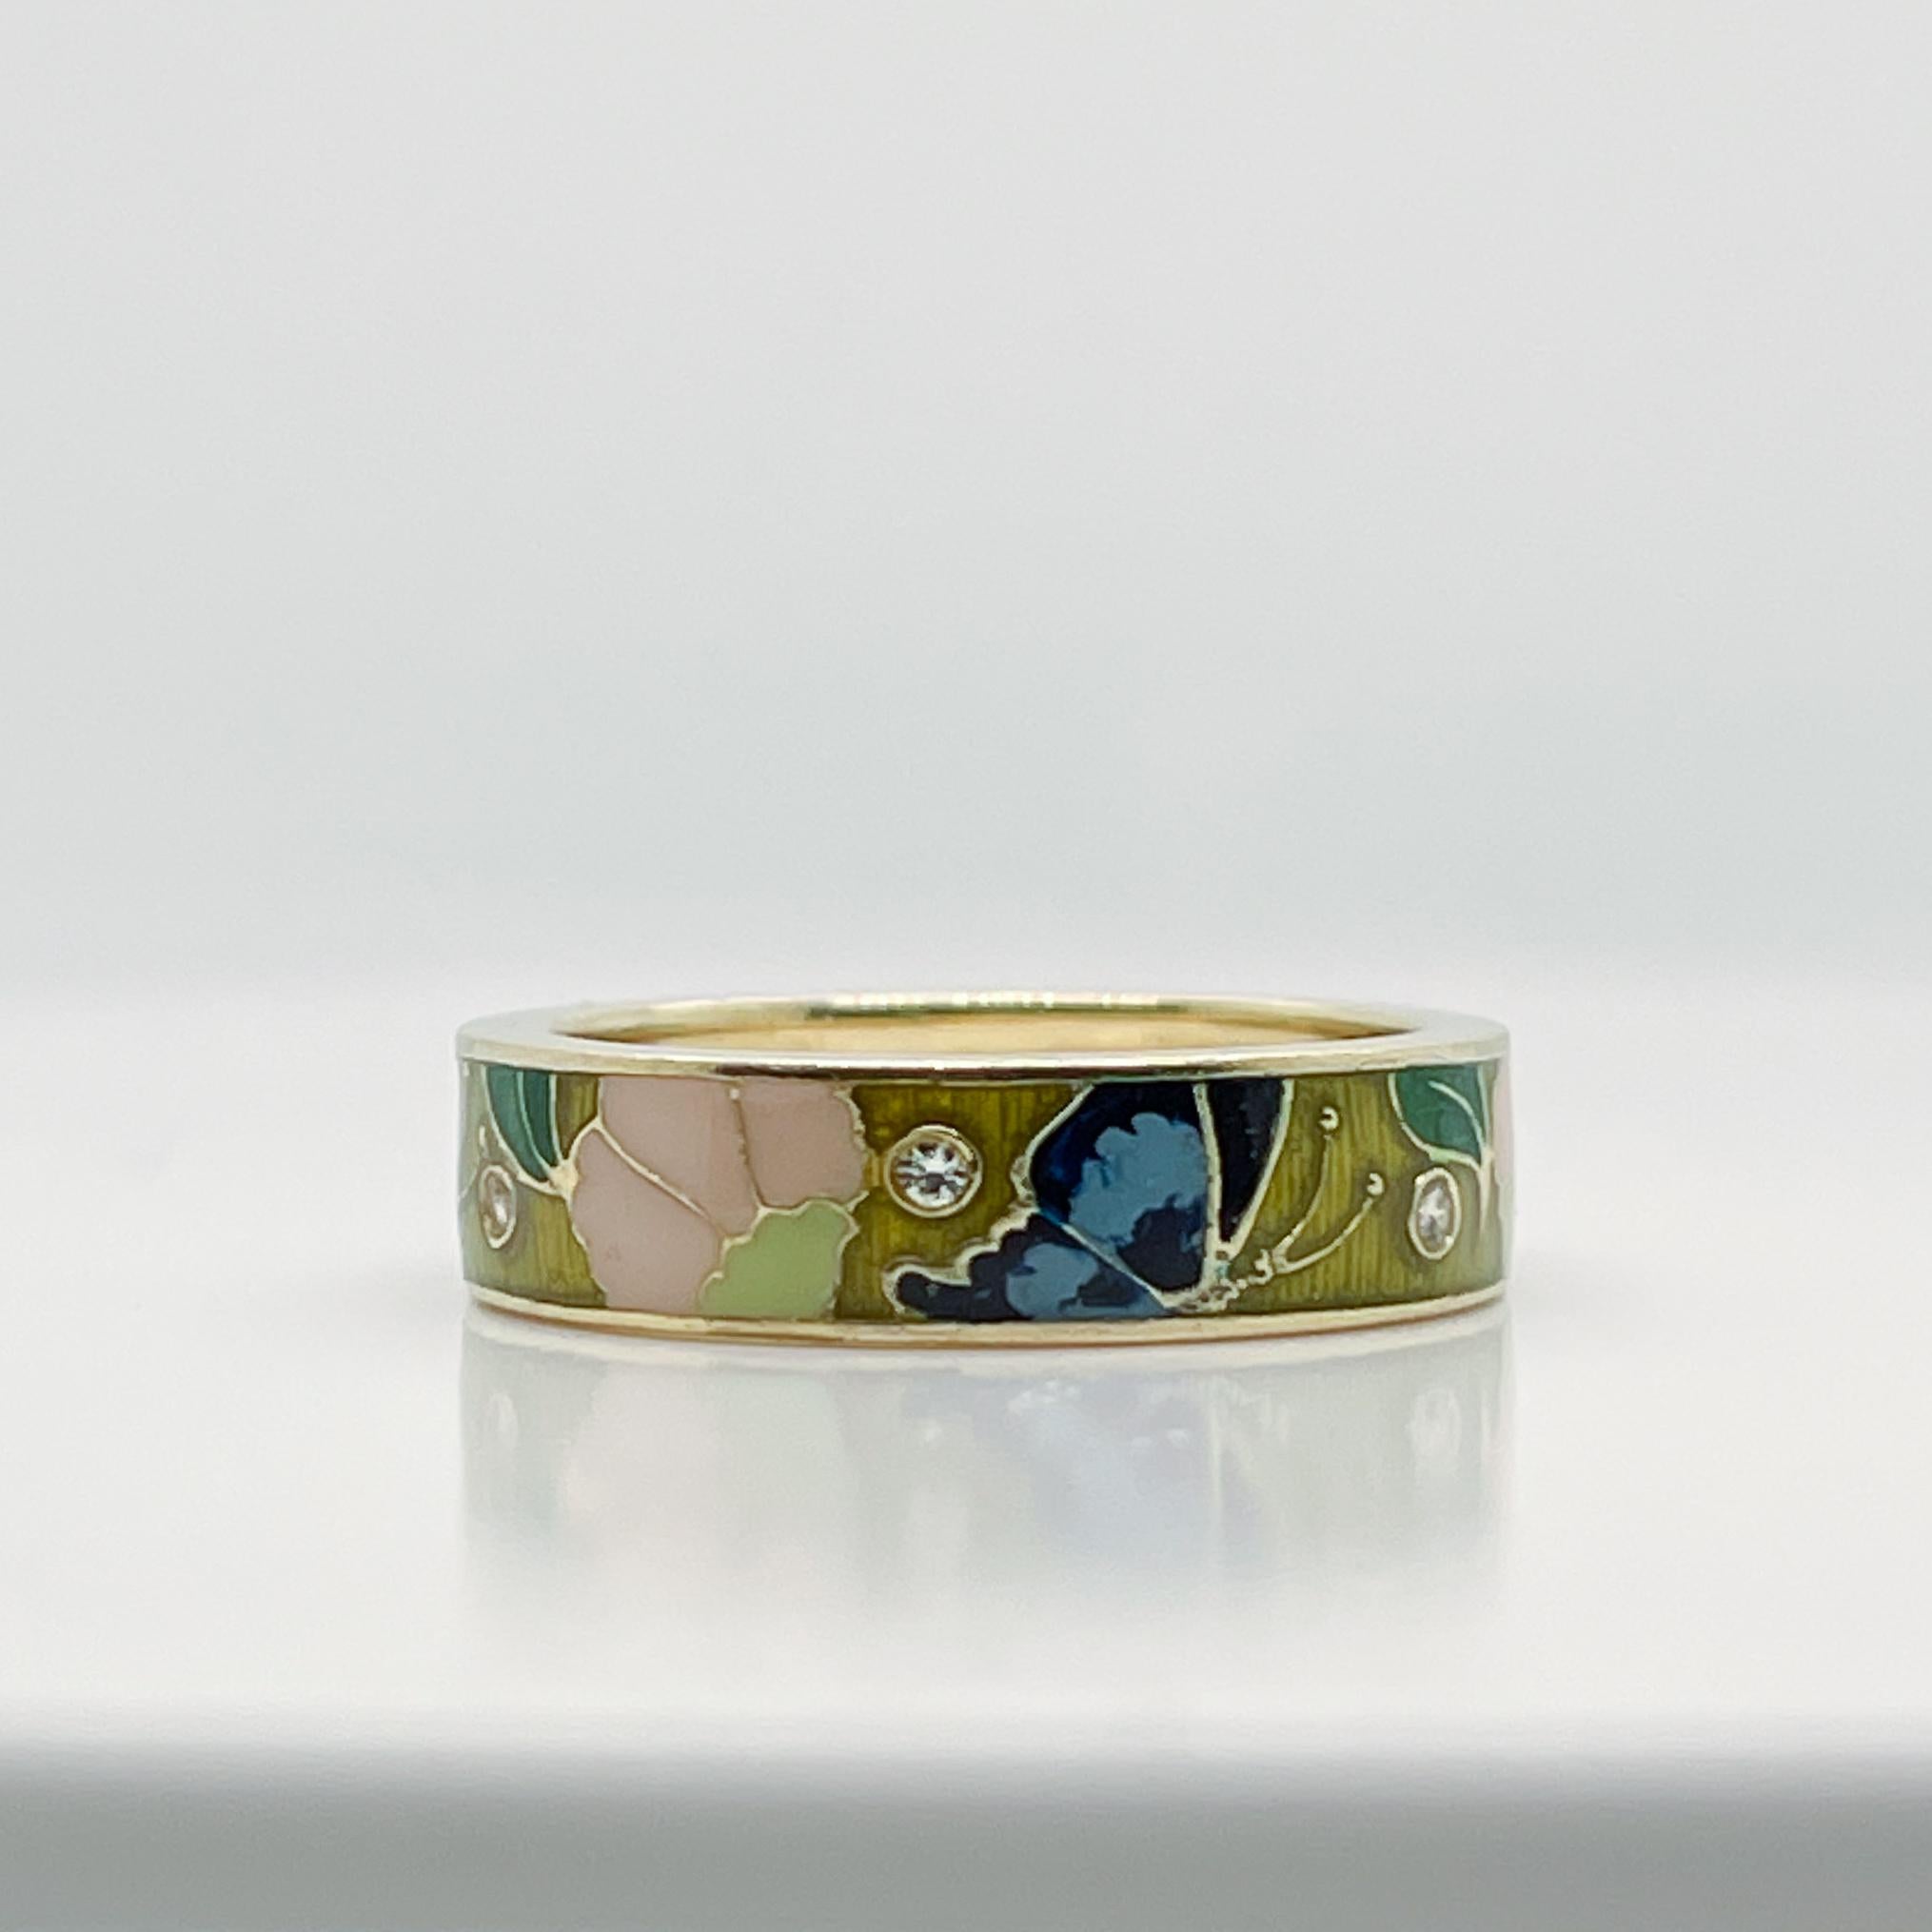 A very fine, vintage Hidalgo 18k gold, diamond and enamel band ring. 

Decorated with brightly colored enamel butterflies and flowers around the circumference and flush-set with round brilliant white diamonds. 

Simply a great ring!

Date:
21st